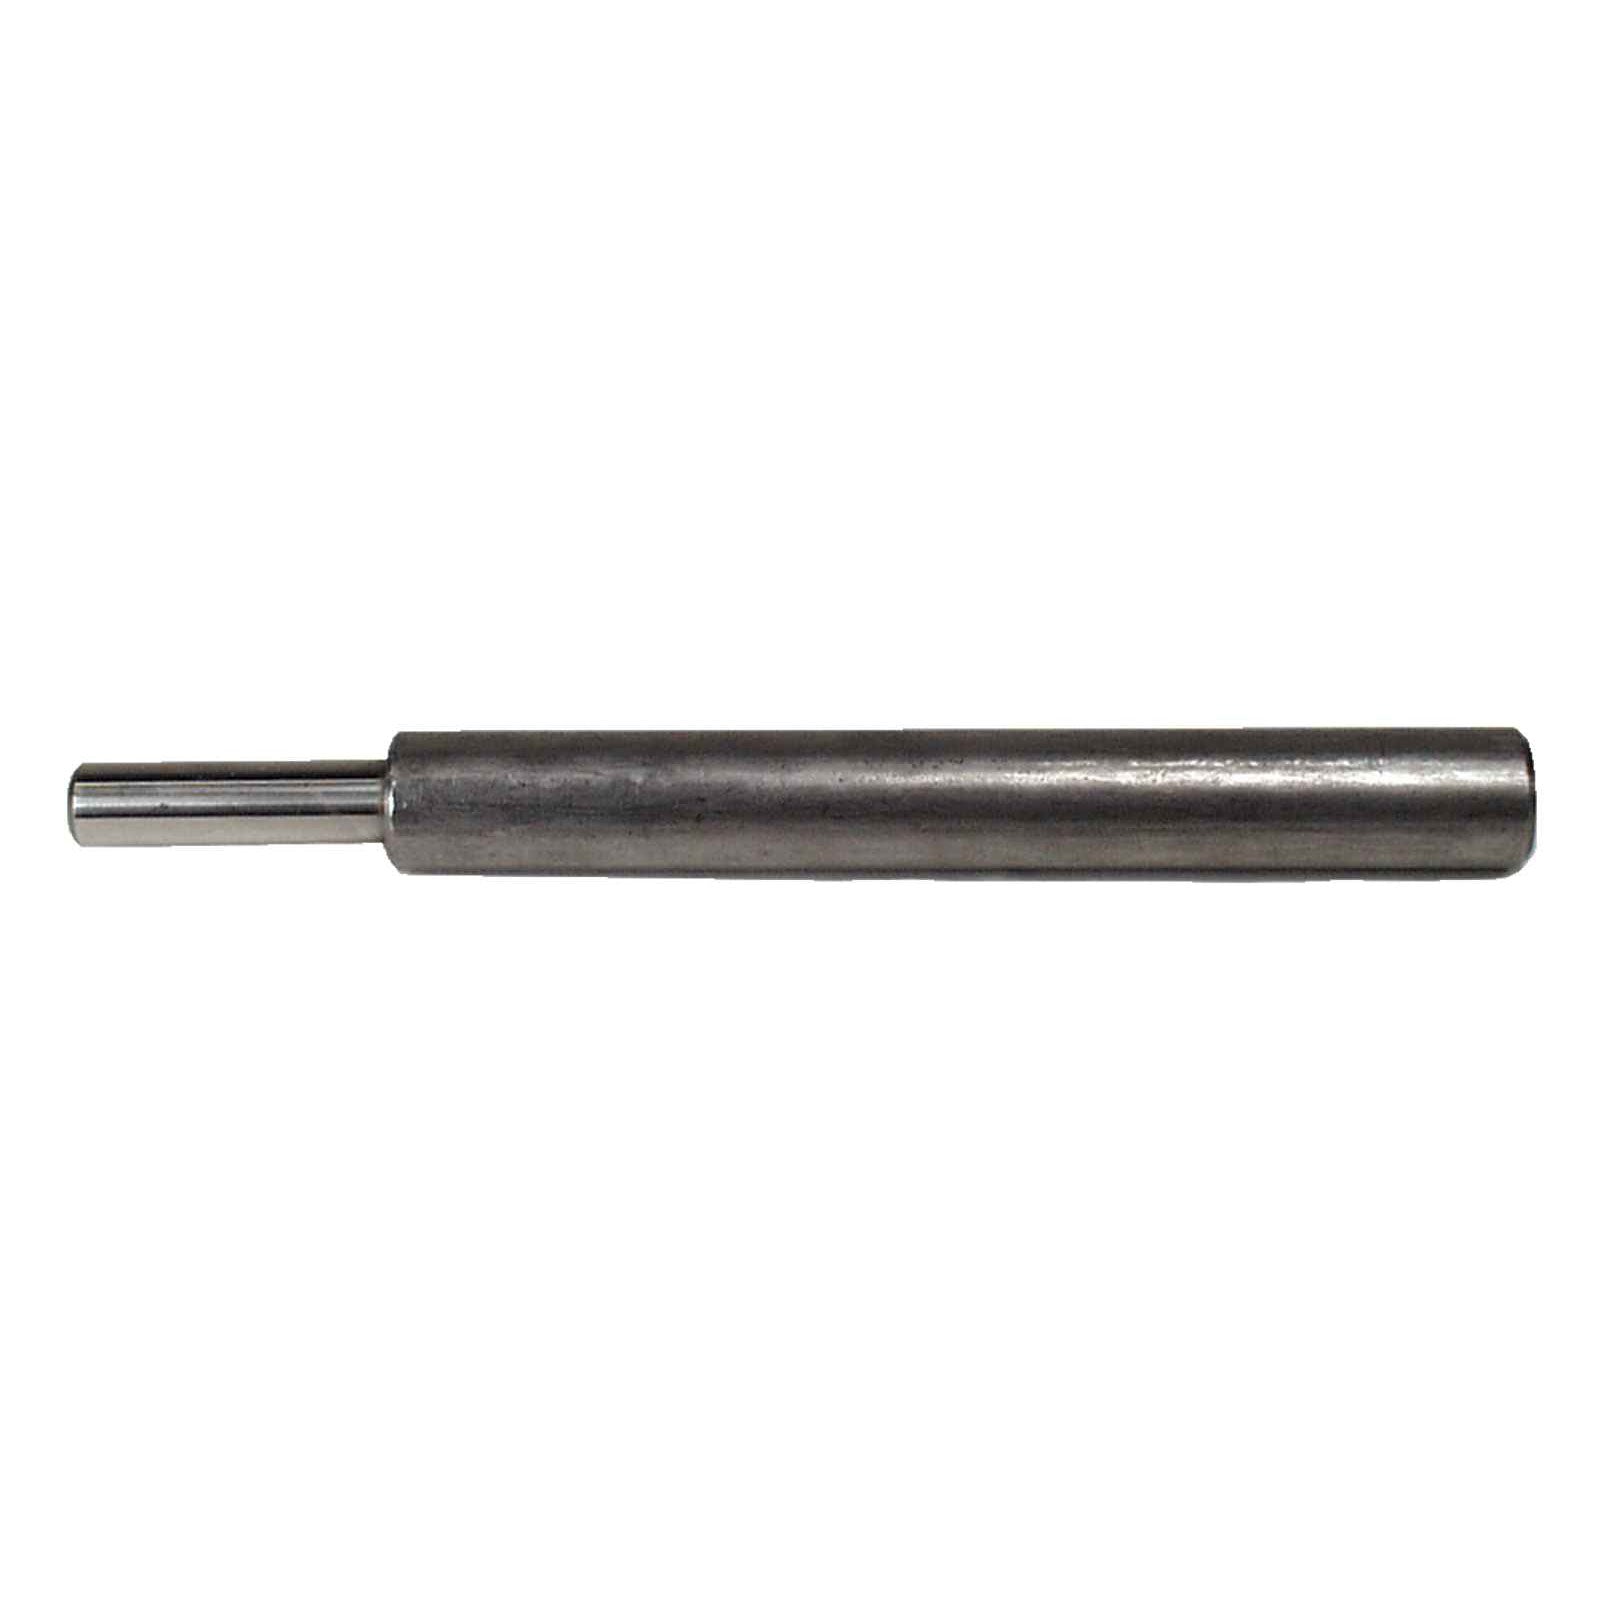 3/4" Strong-Tie Drop-In Anchor Setting Tool, Pkg 5